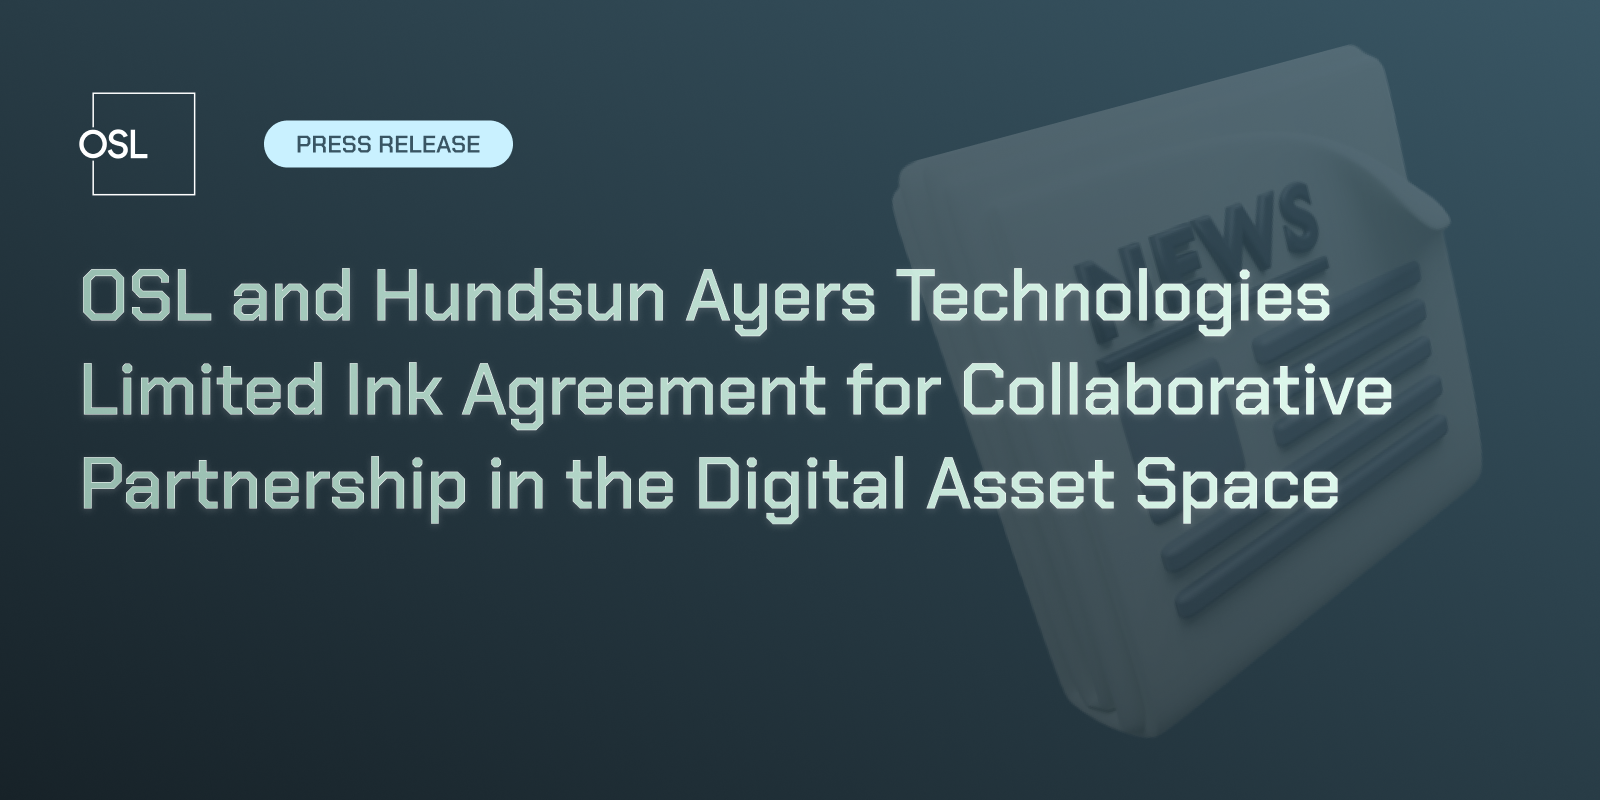 OSL and Hundsun Ayers Technologies Limited Ink Agreement for Collaborative Partnership in the Digital Asset Space